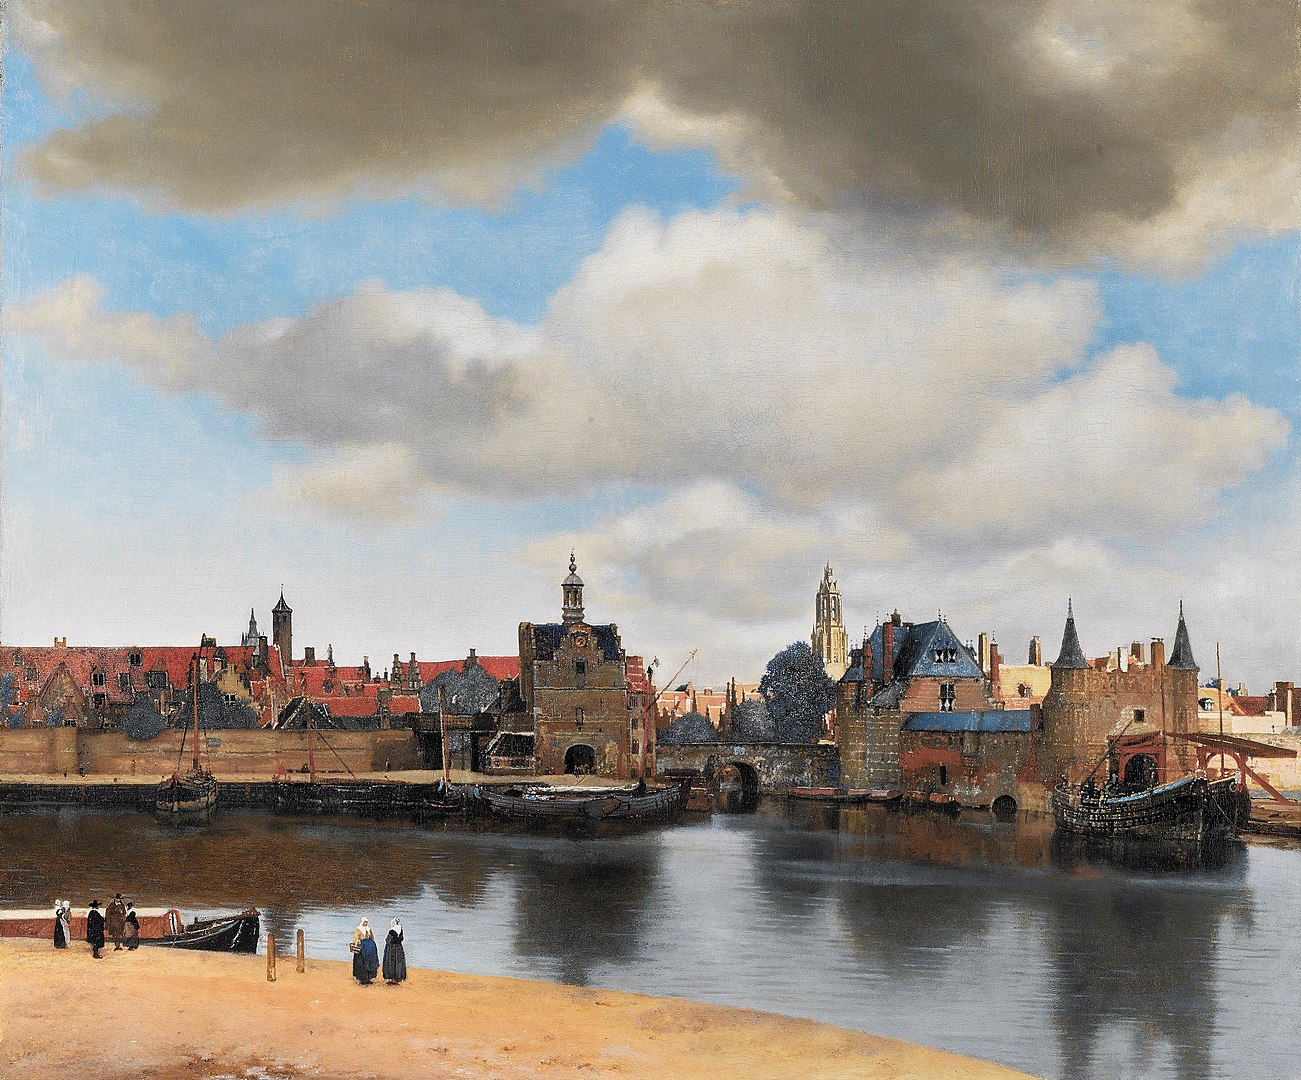 View of Delft by Johannes Vermeer - c. 1660 - 1661 - 96.5 x 116.4 cm Mauritshuis, The Hague